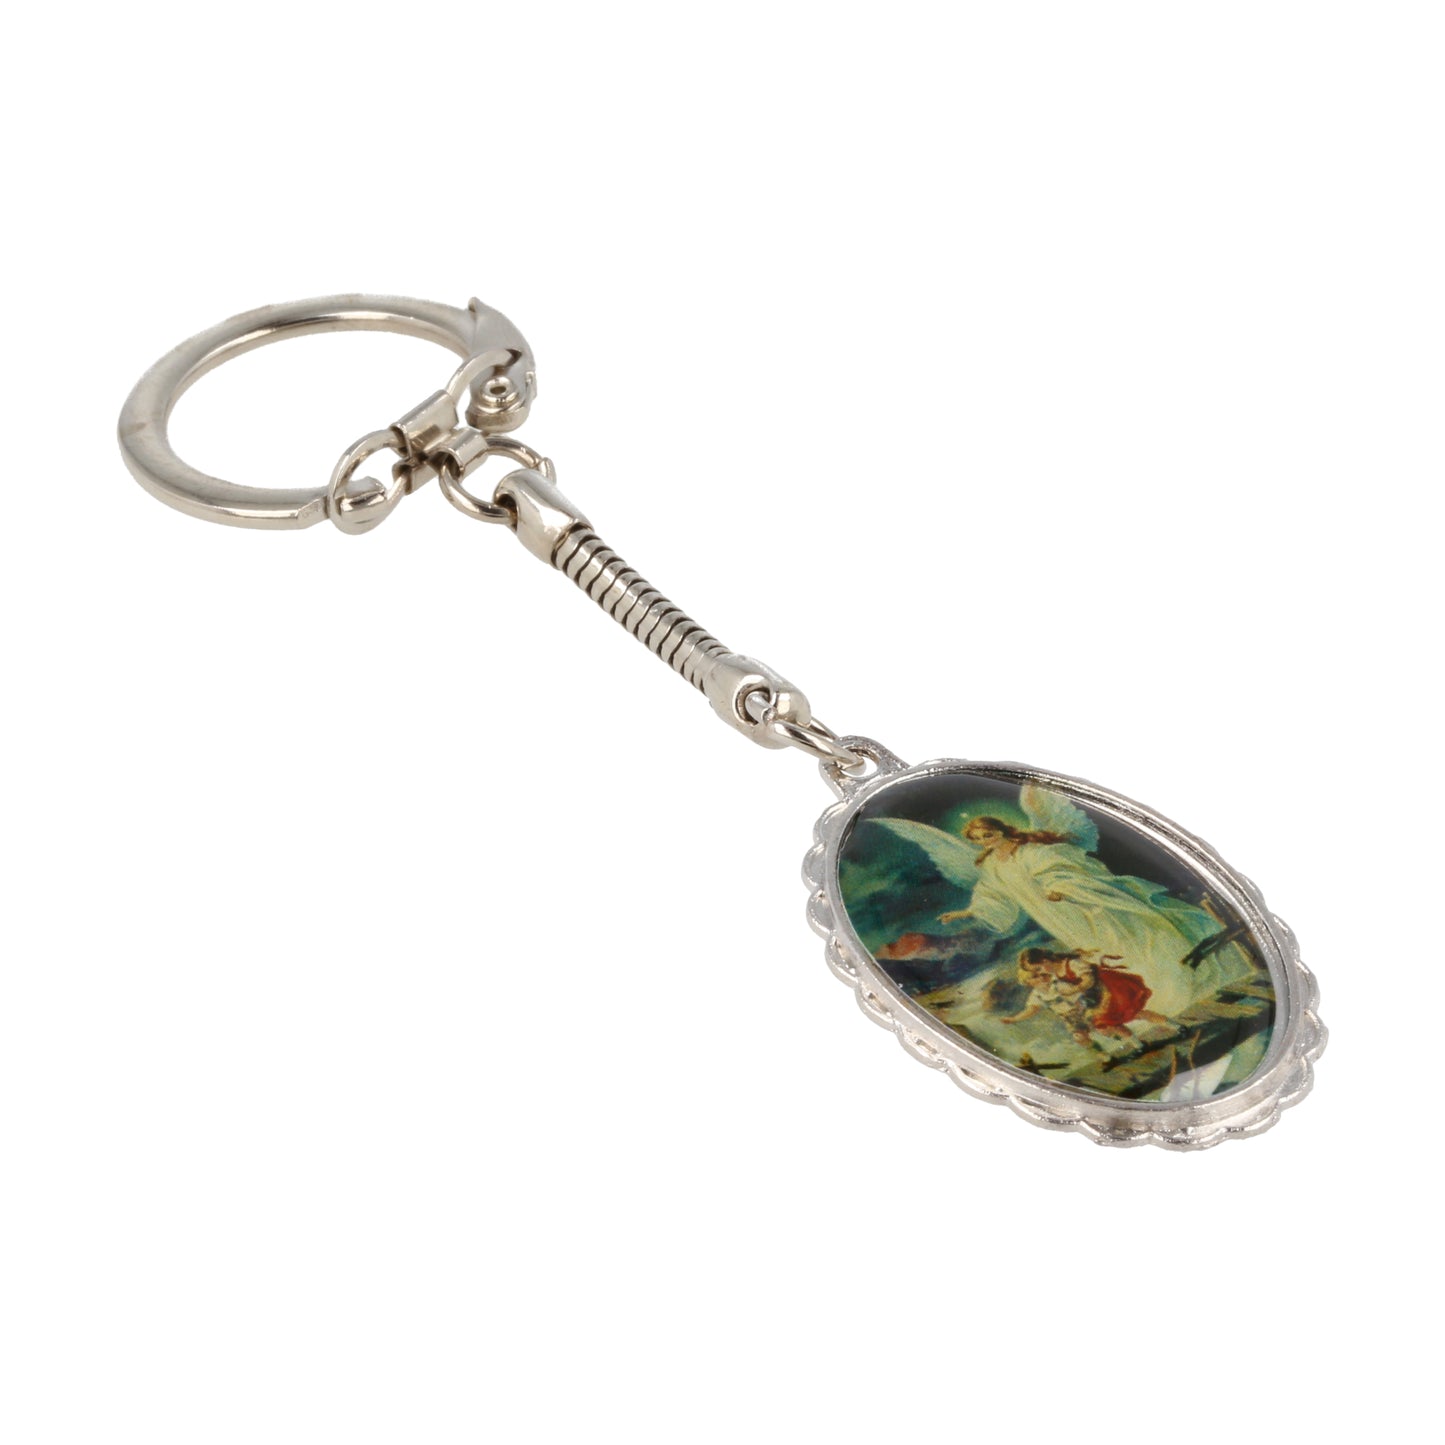 Keychain Guardian Angel Oval Color. Souvenirs from Italy